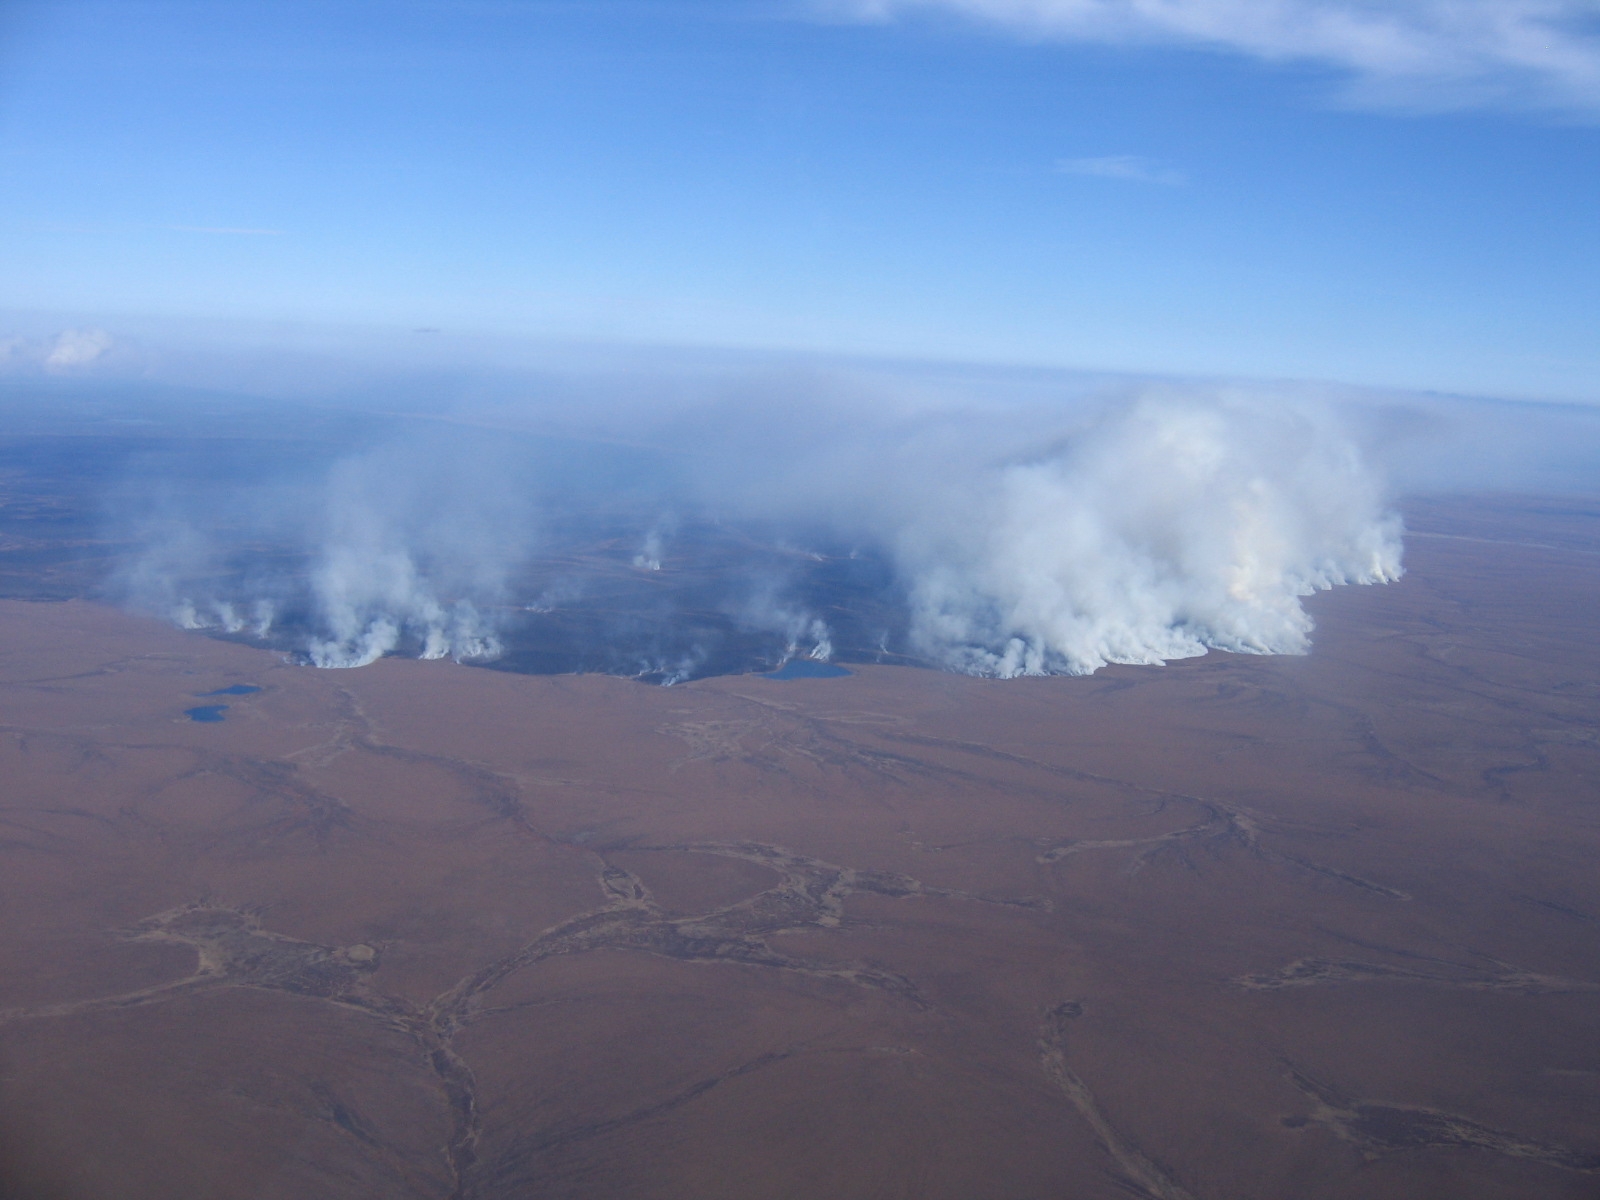 View from an airplane of the smoke and blackened land in the Anaktuvuk River area in Alaska due to a wildfire.